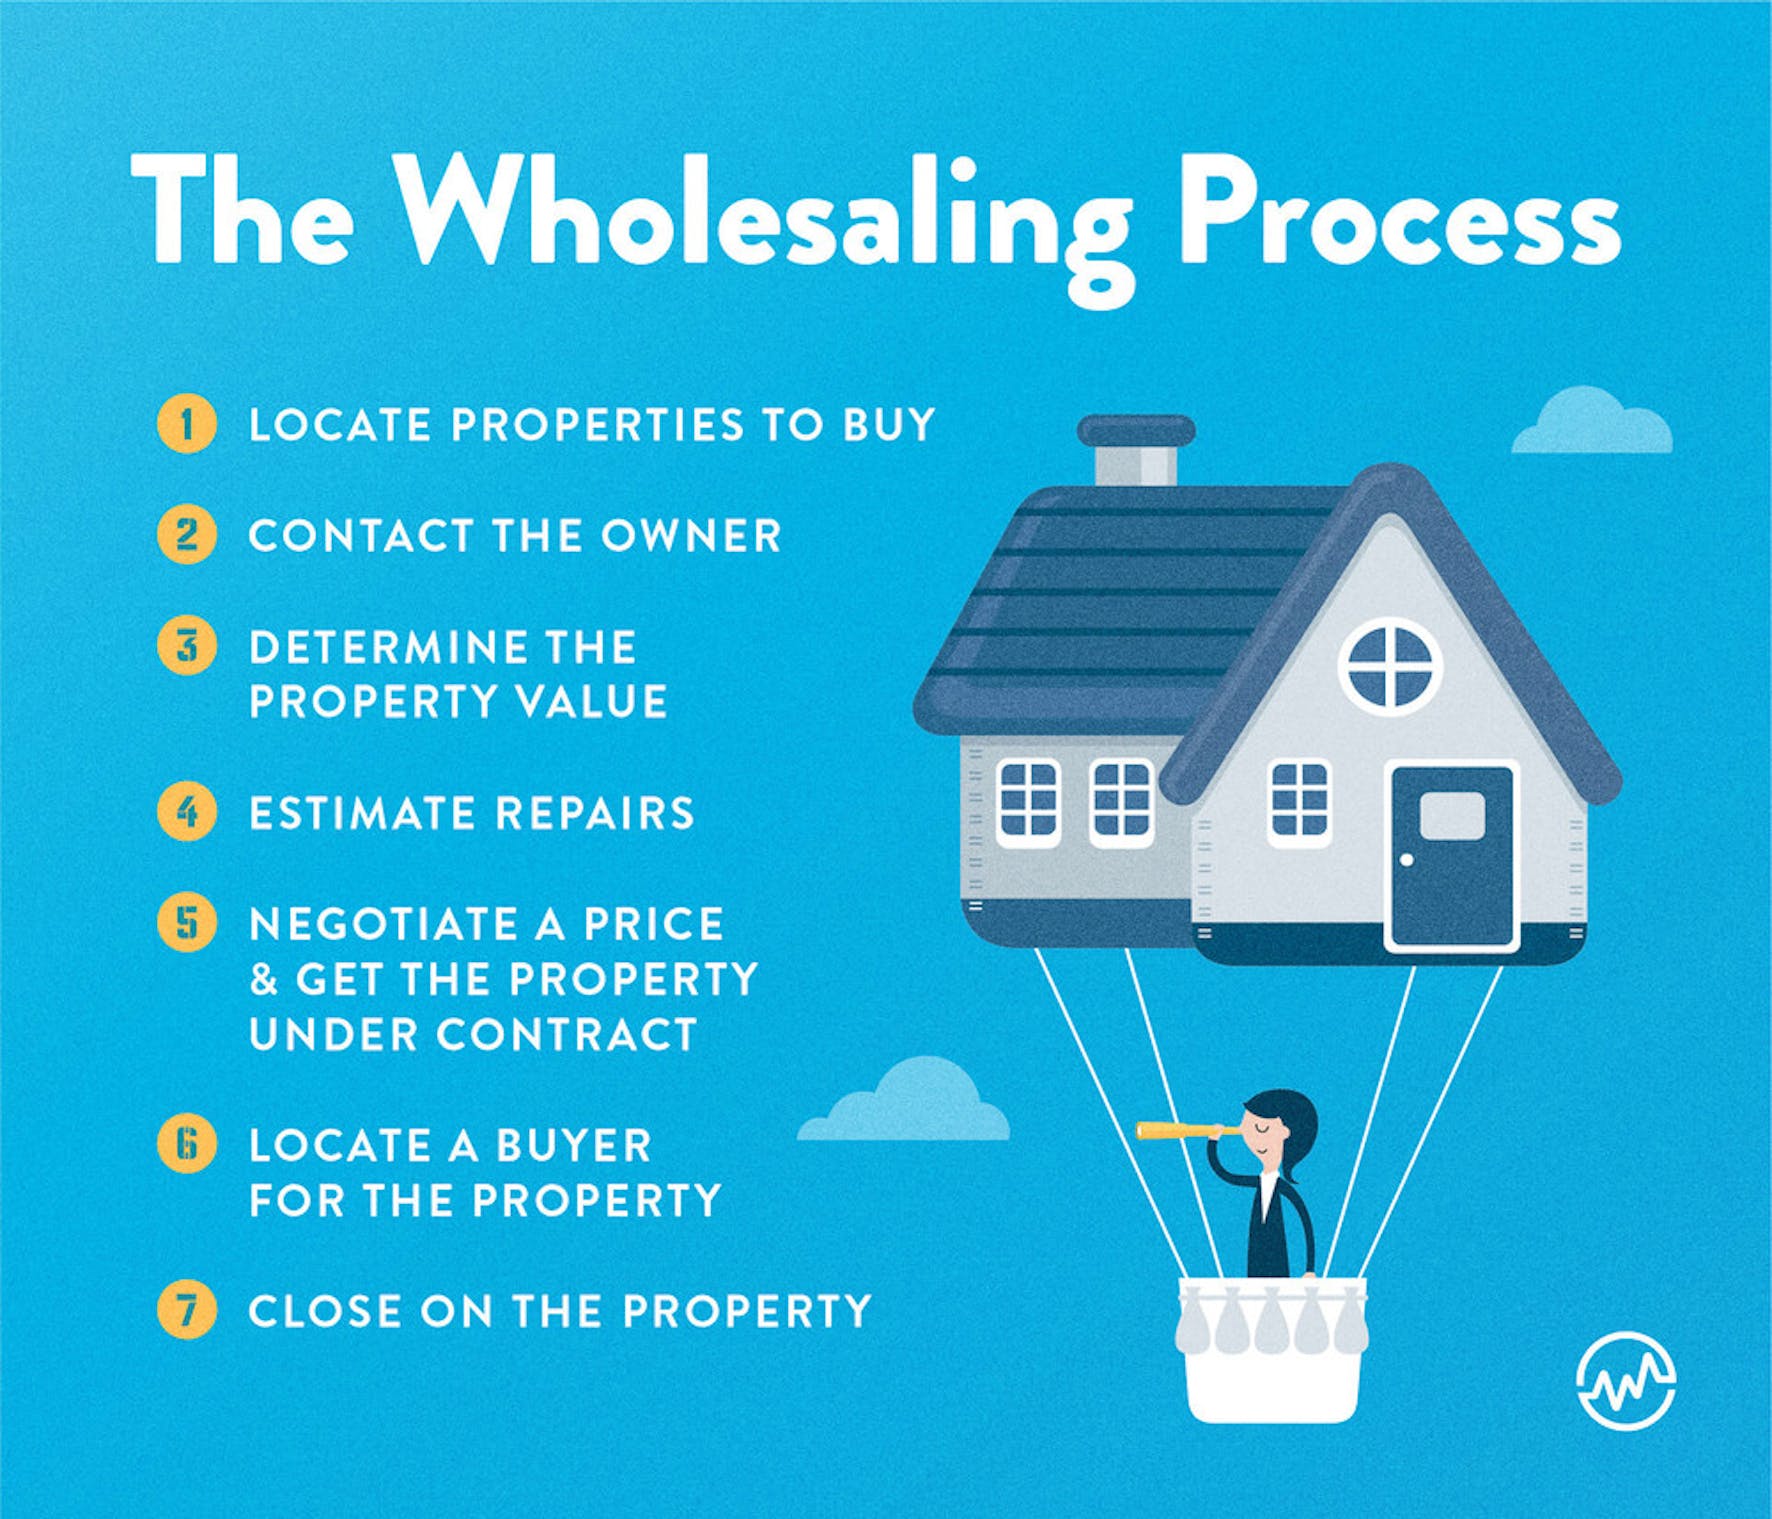 How does wholesaling real estate work